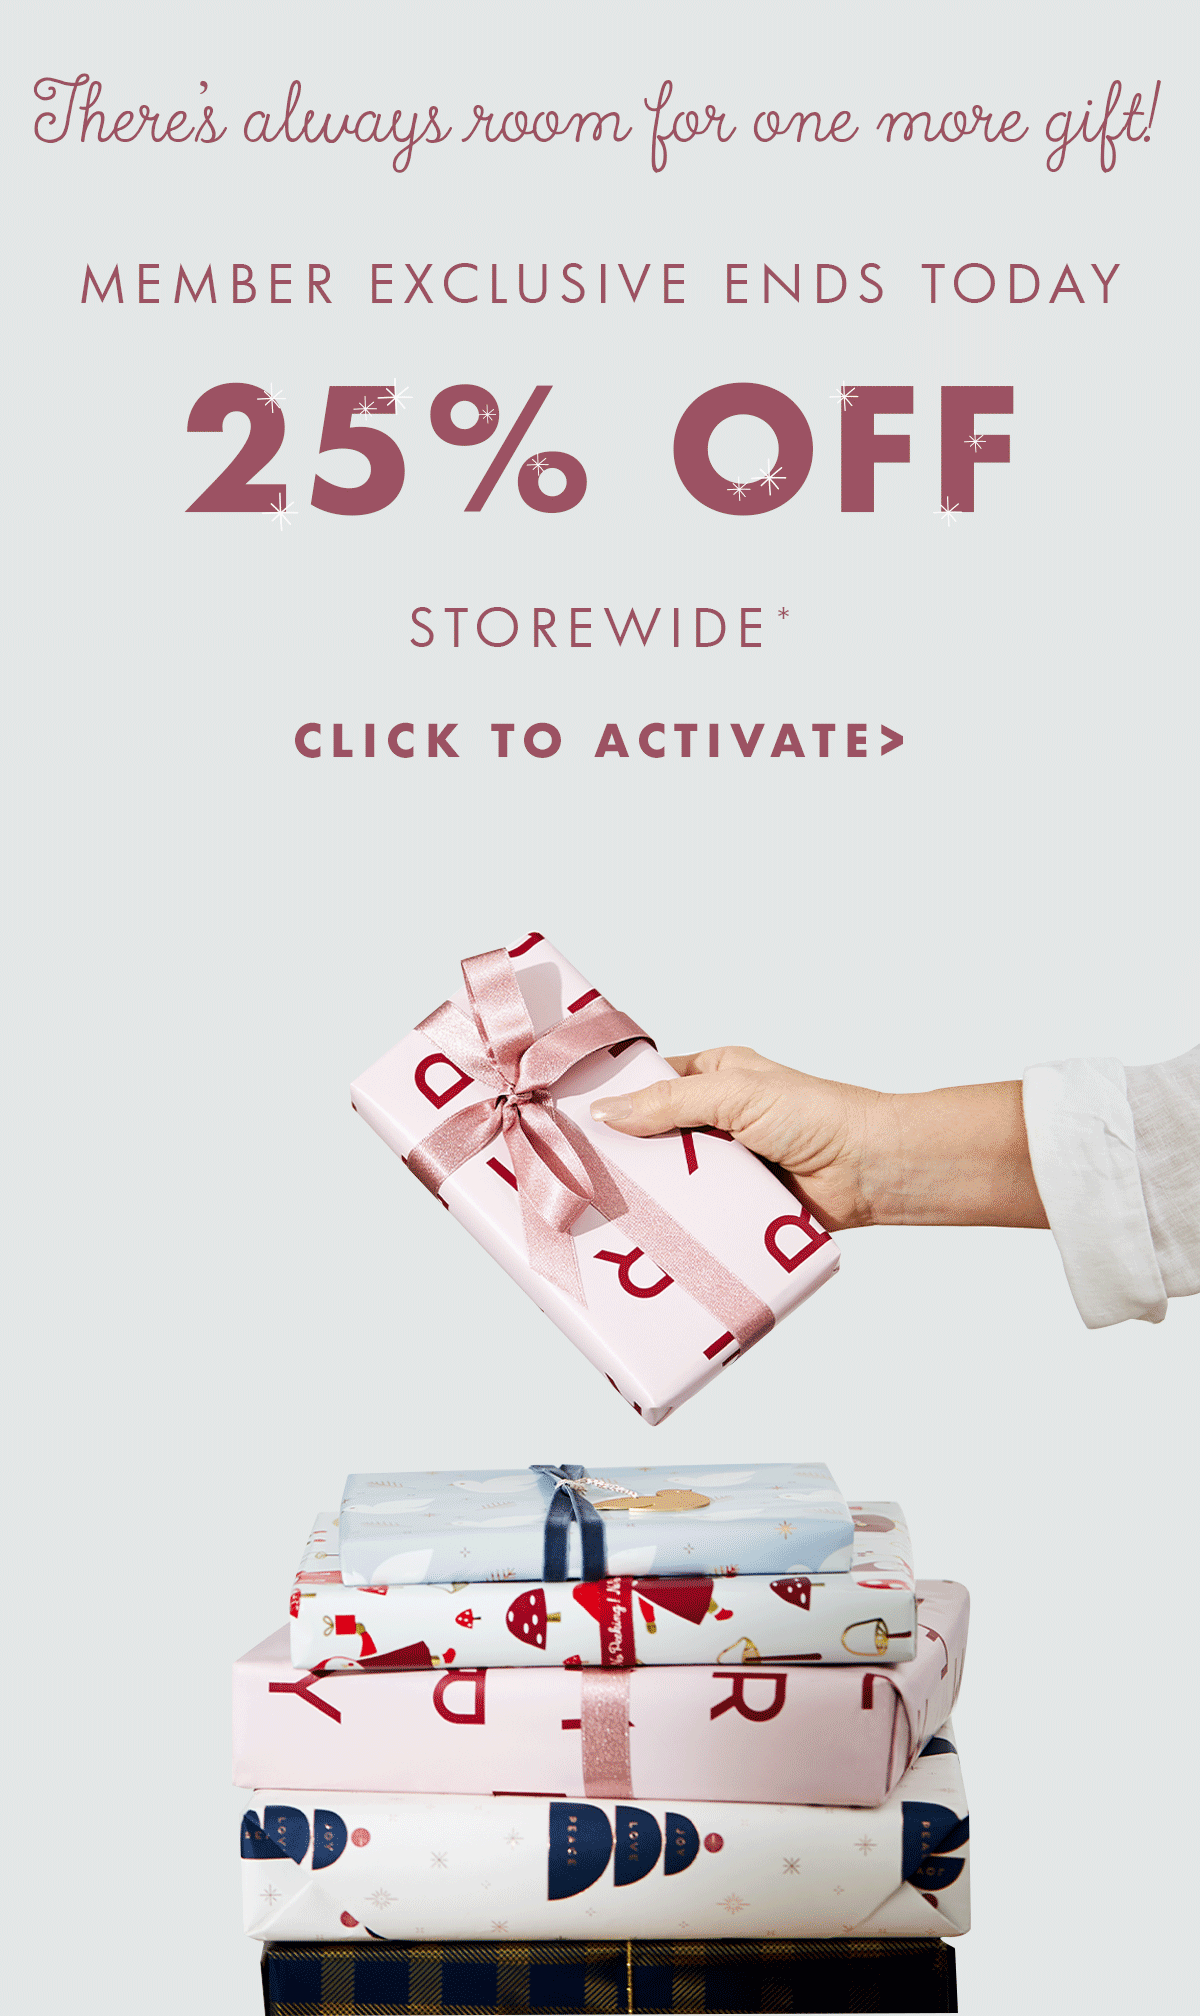 Member exclusive ends today! 25% off storewide.* Click to activate. 